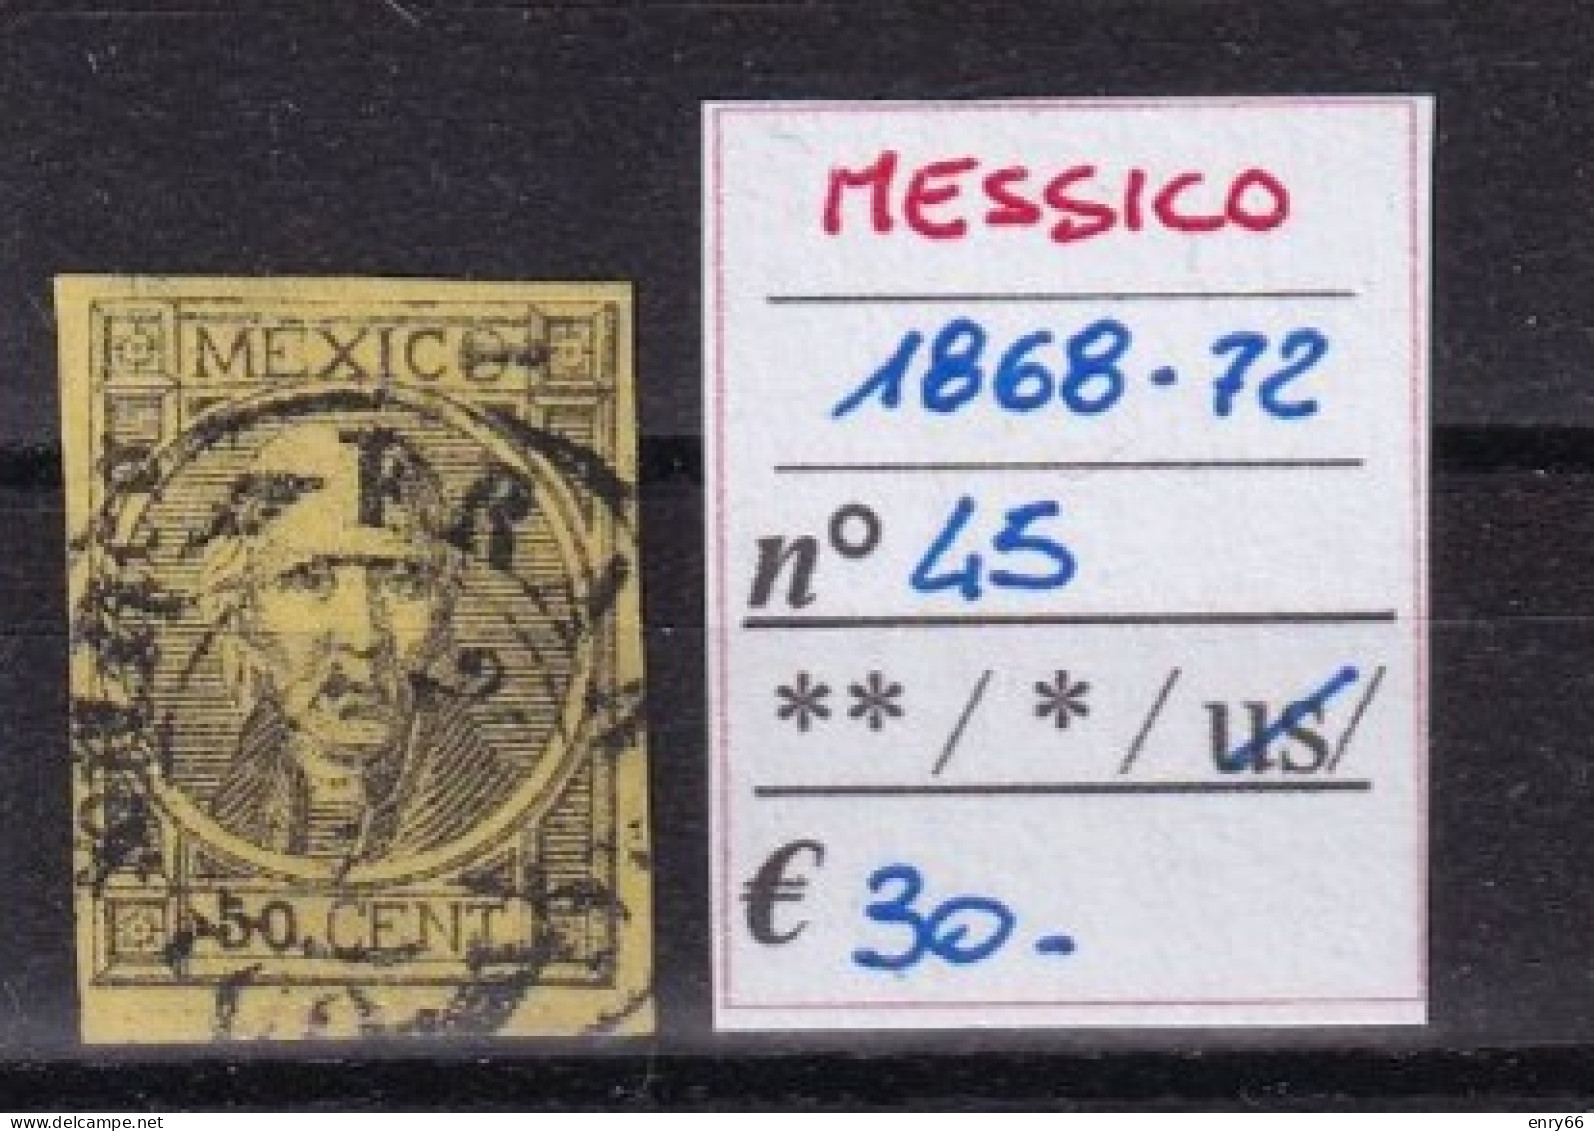 MESSICO 1868-72 N°46 USED - Mexico